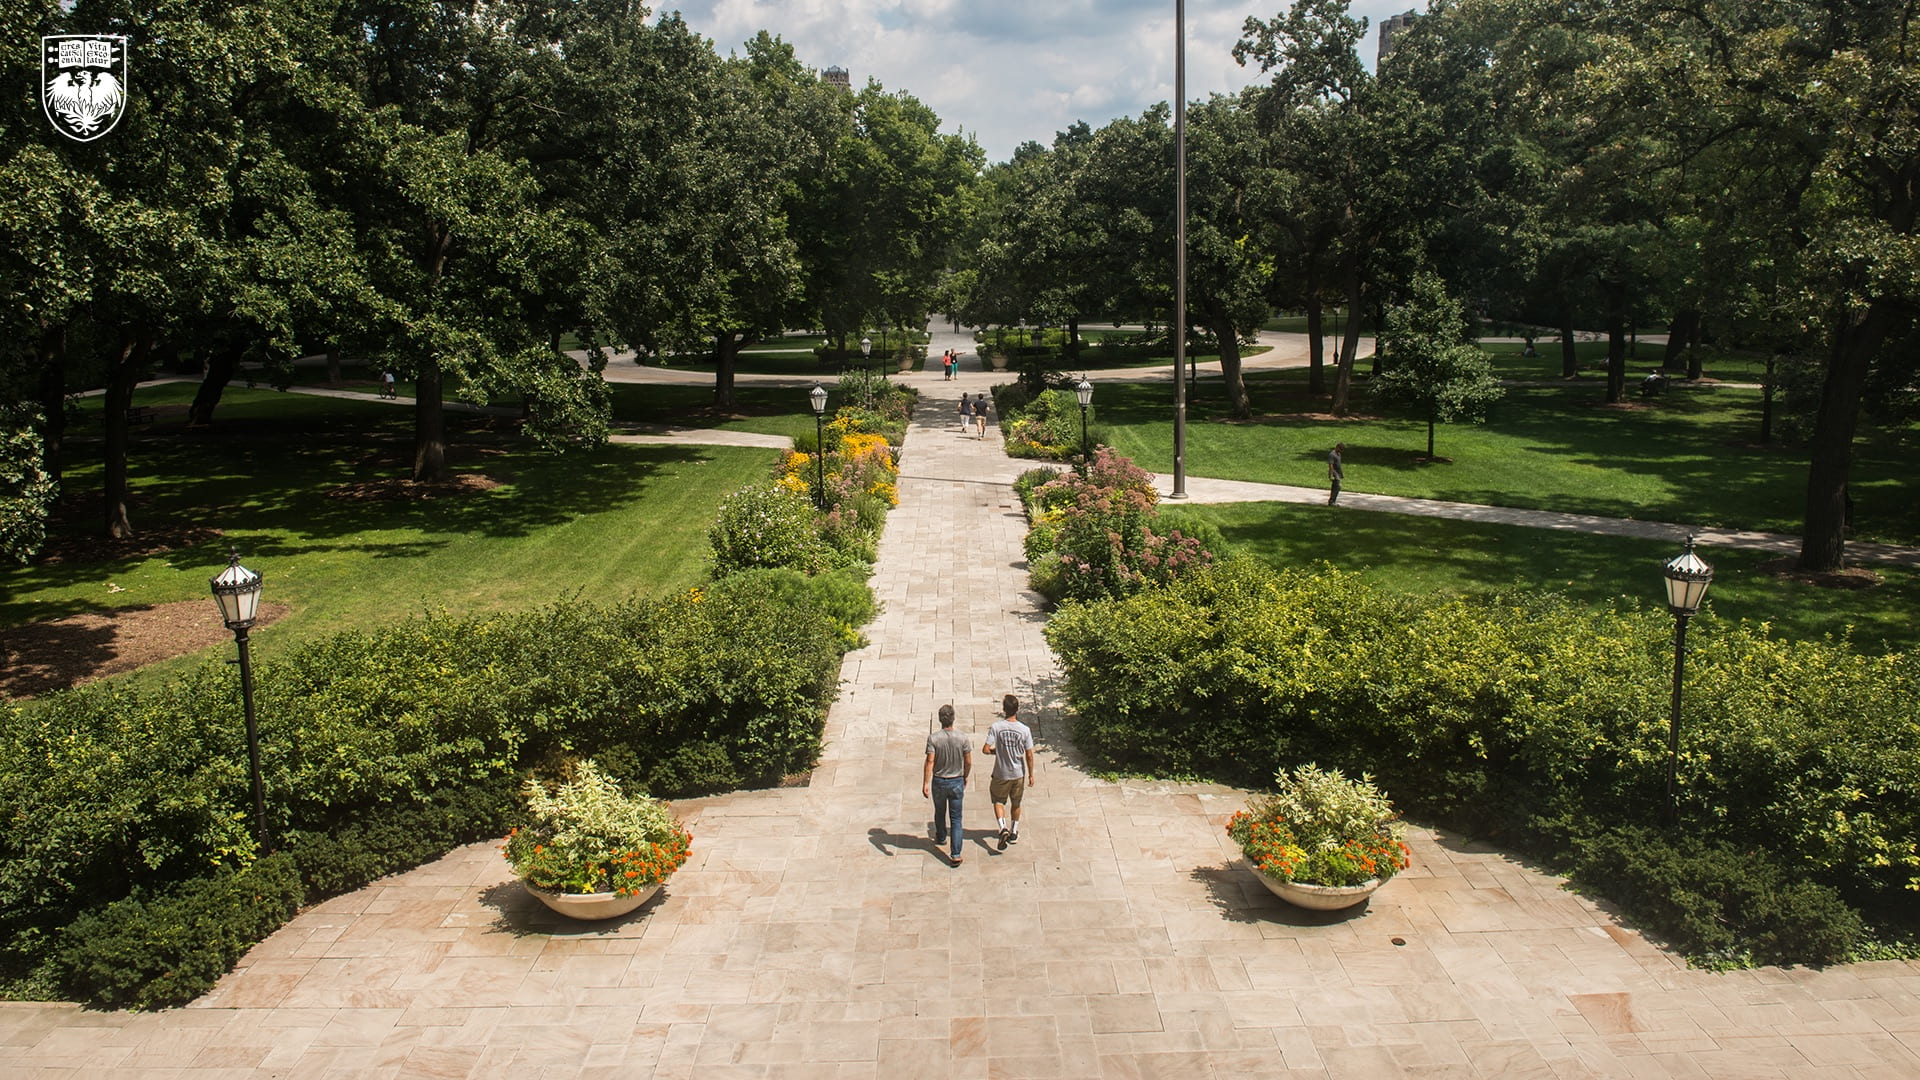 People walking down main quad pathway in daylight flanked by bushes and trees